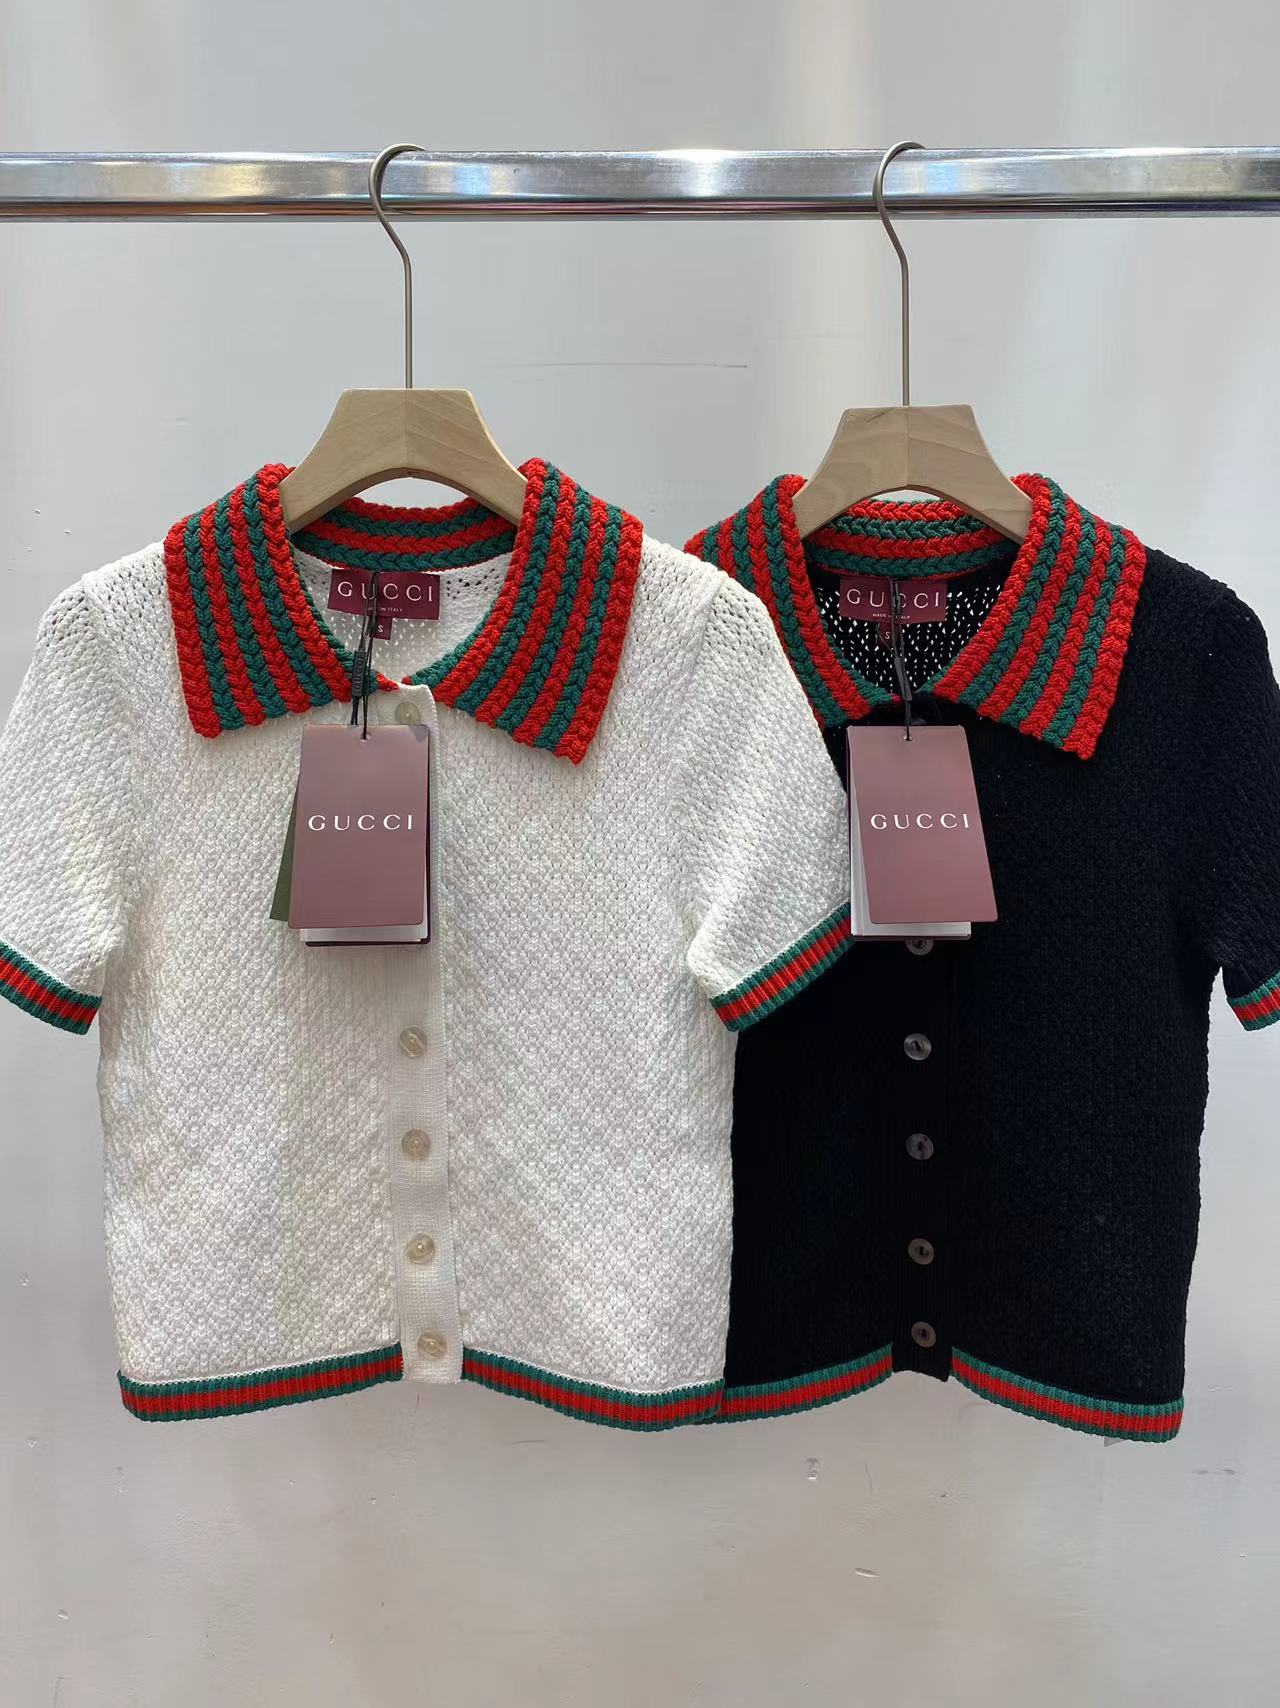 Gucci Clothing Knit Sweater Sweatshirts High Quality Online
 Green Red White Knitting